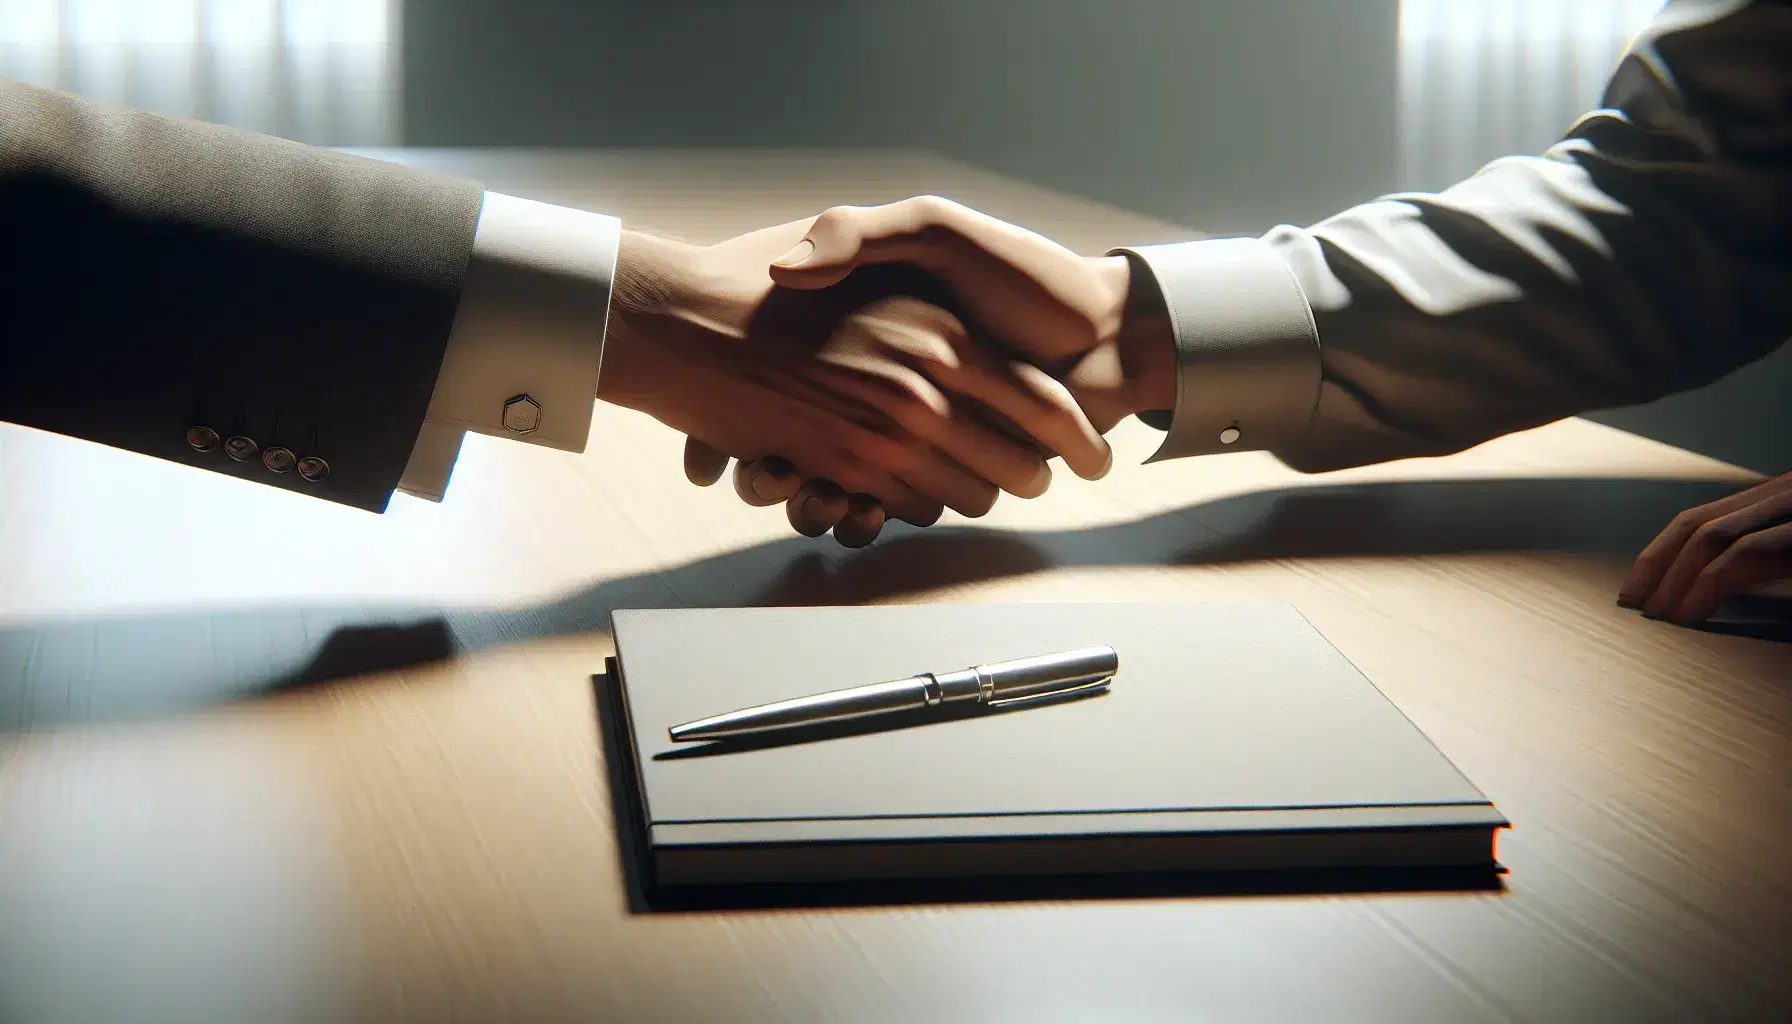 Two hands engaging in a firm handshake, one in a formal suit sleeve, the other in a casual shirt, over a modern light wood desk with a pen and closed book.